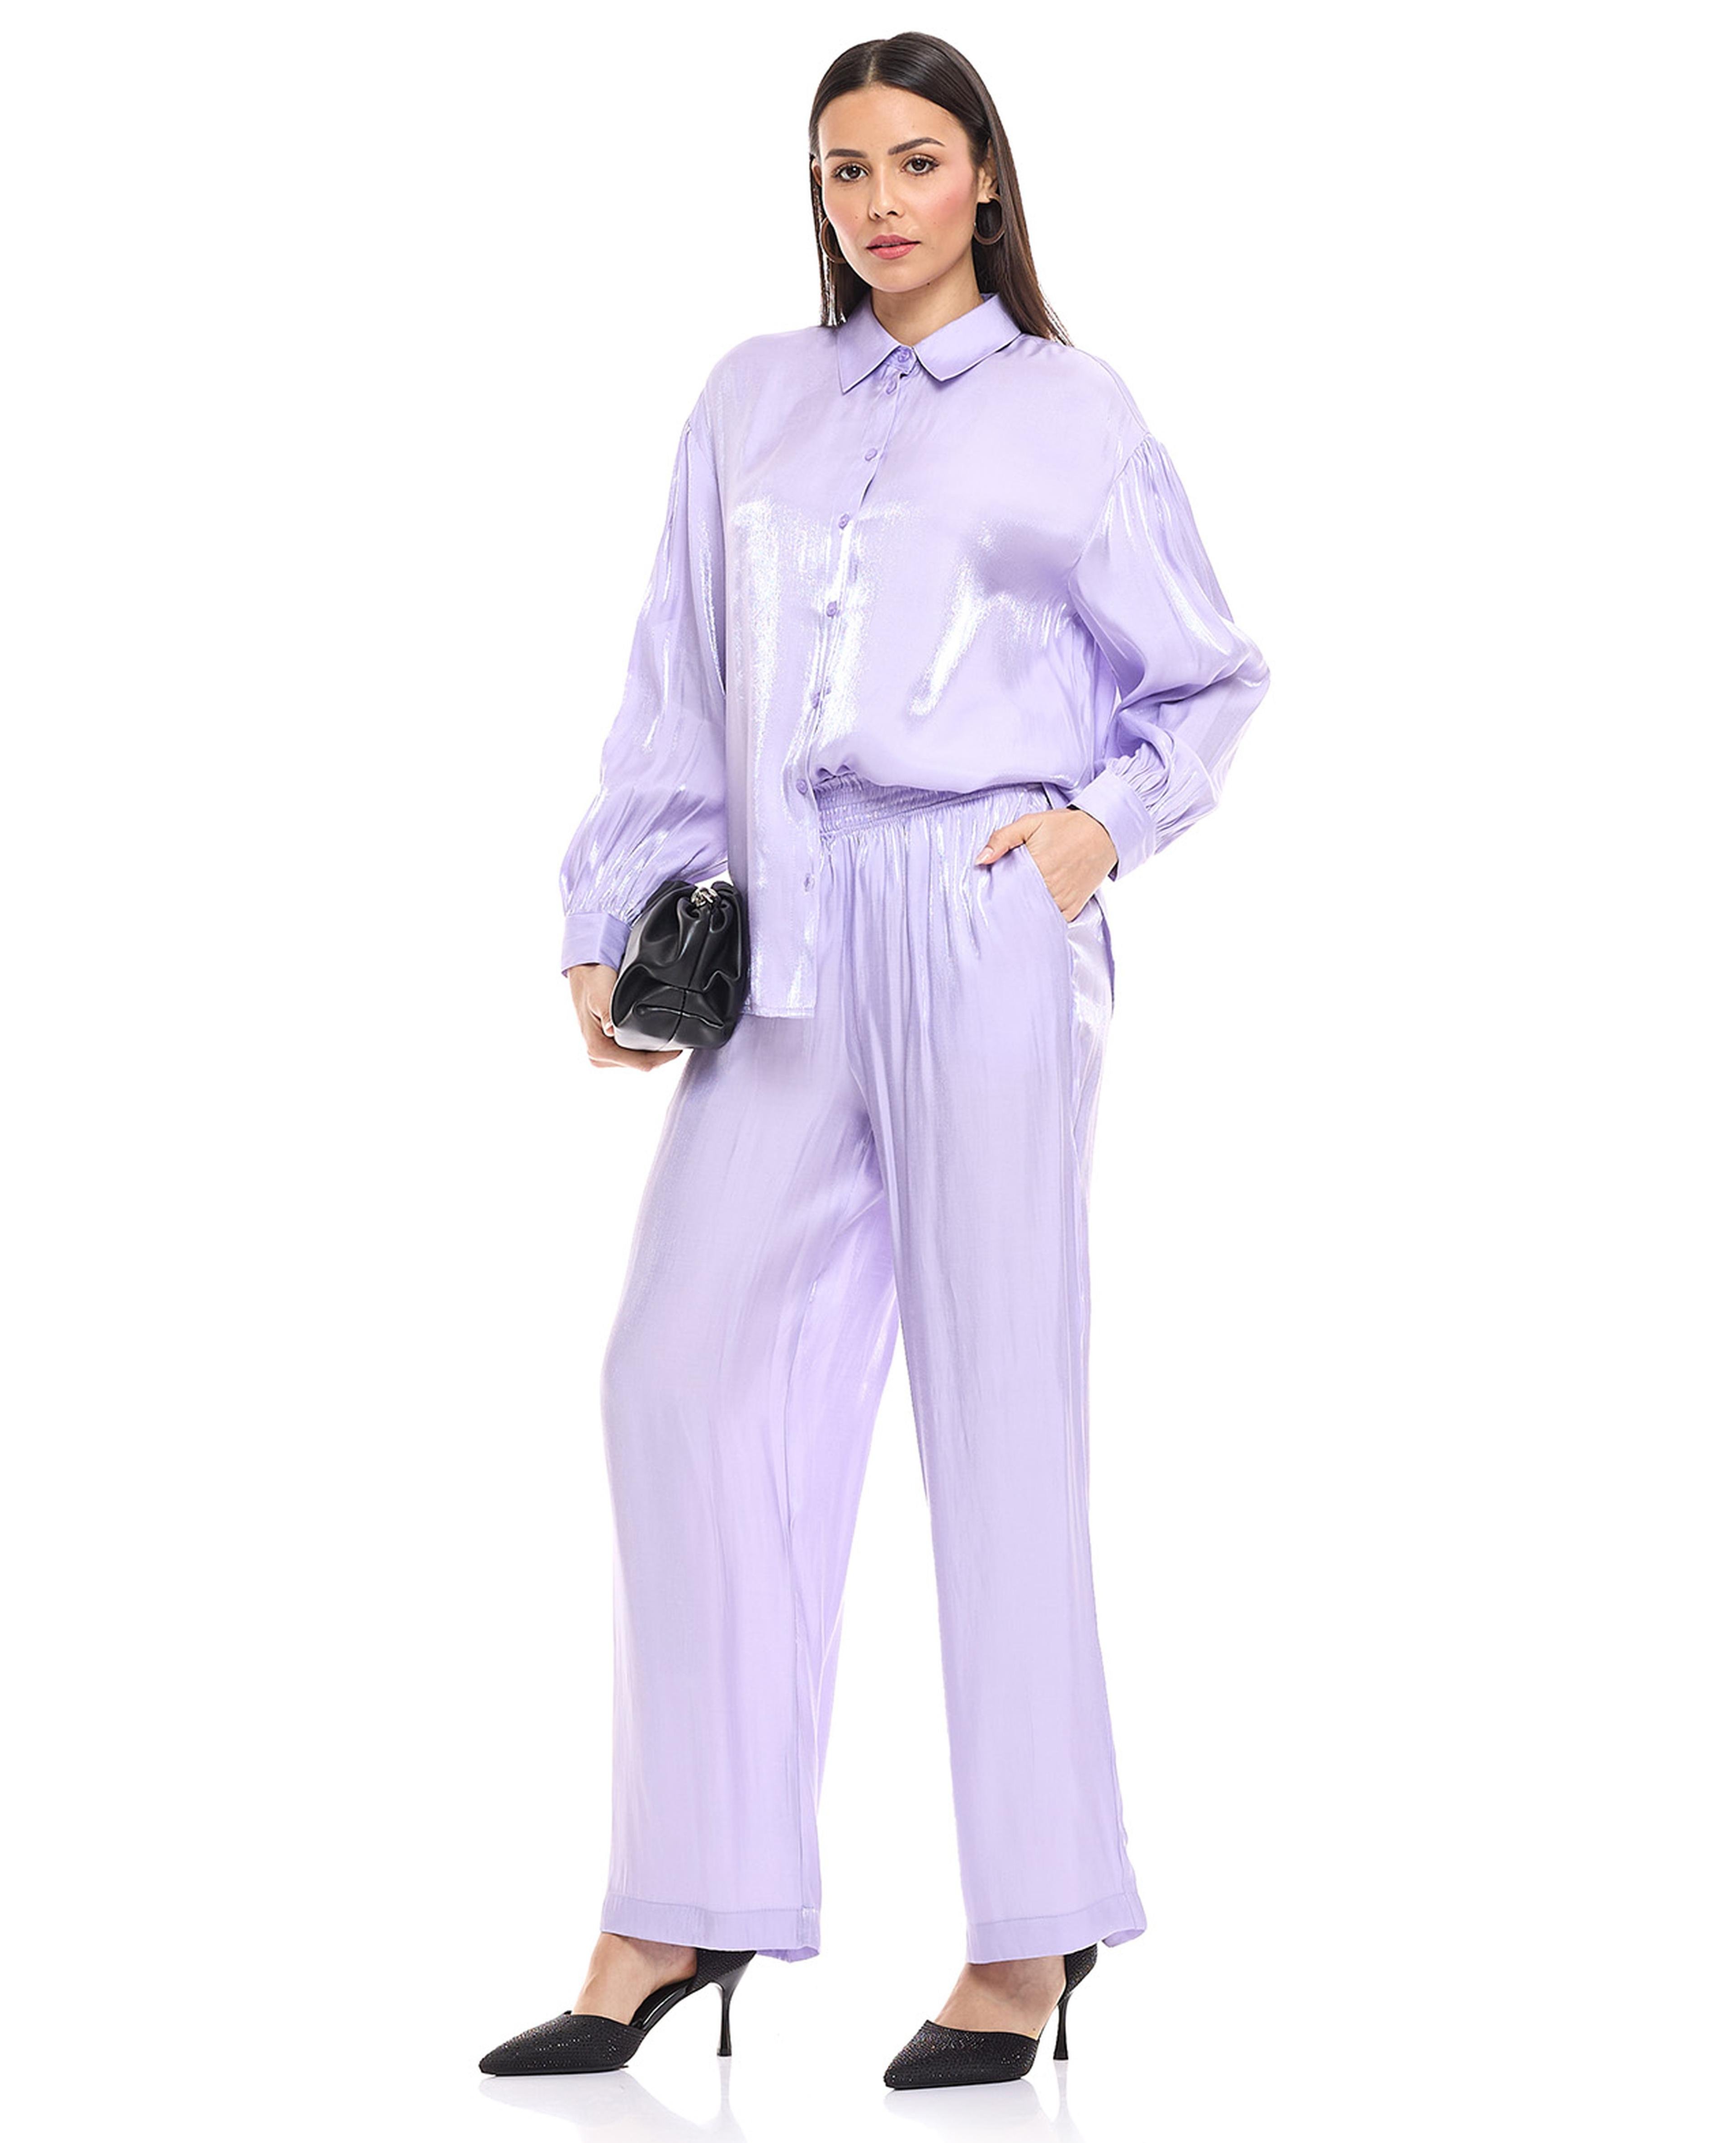 Solid Wide Leg Trousers with Elastic Waist